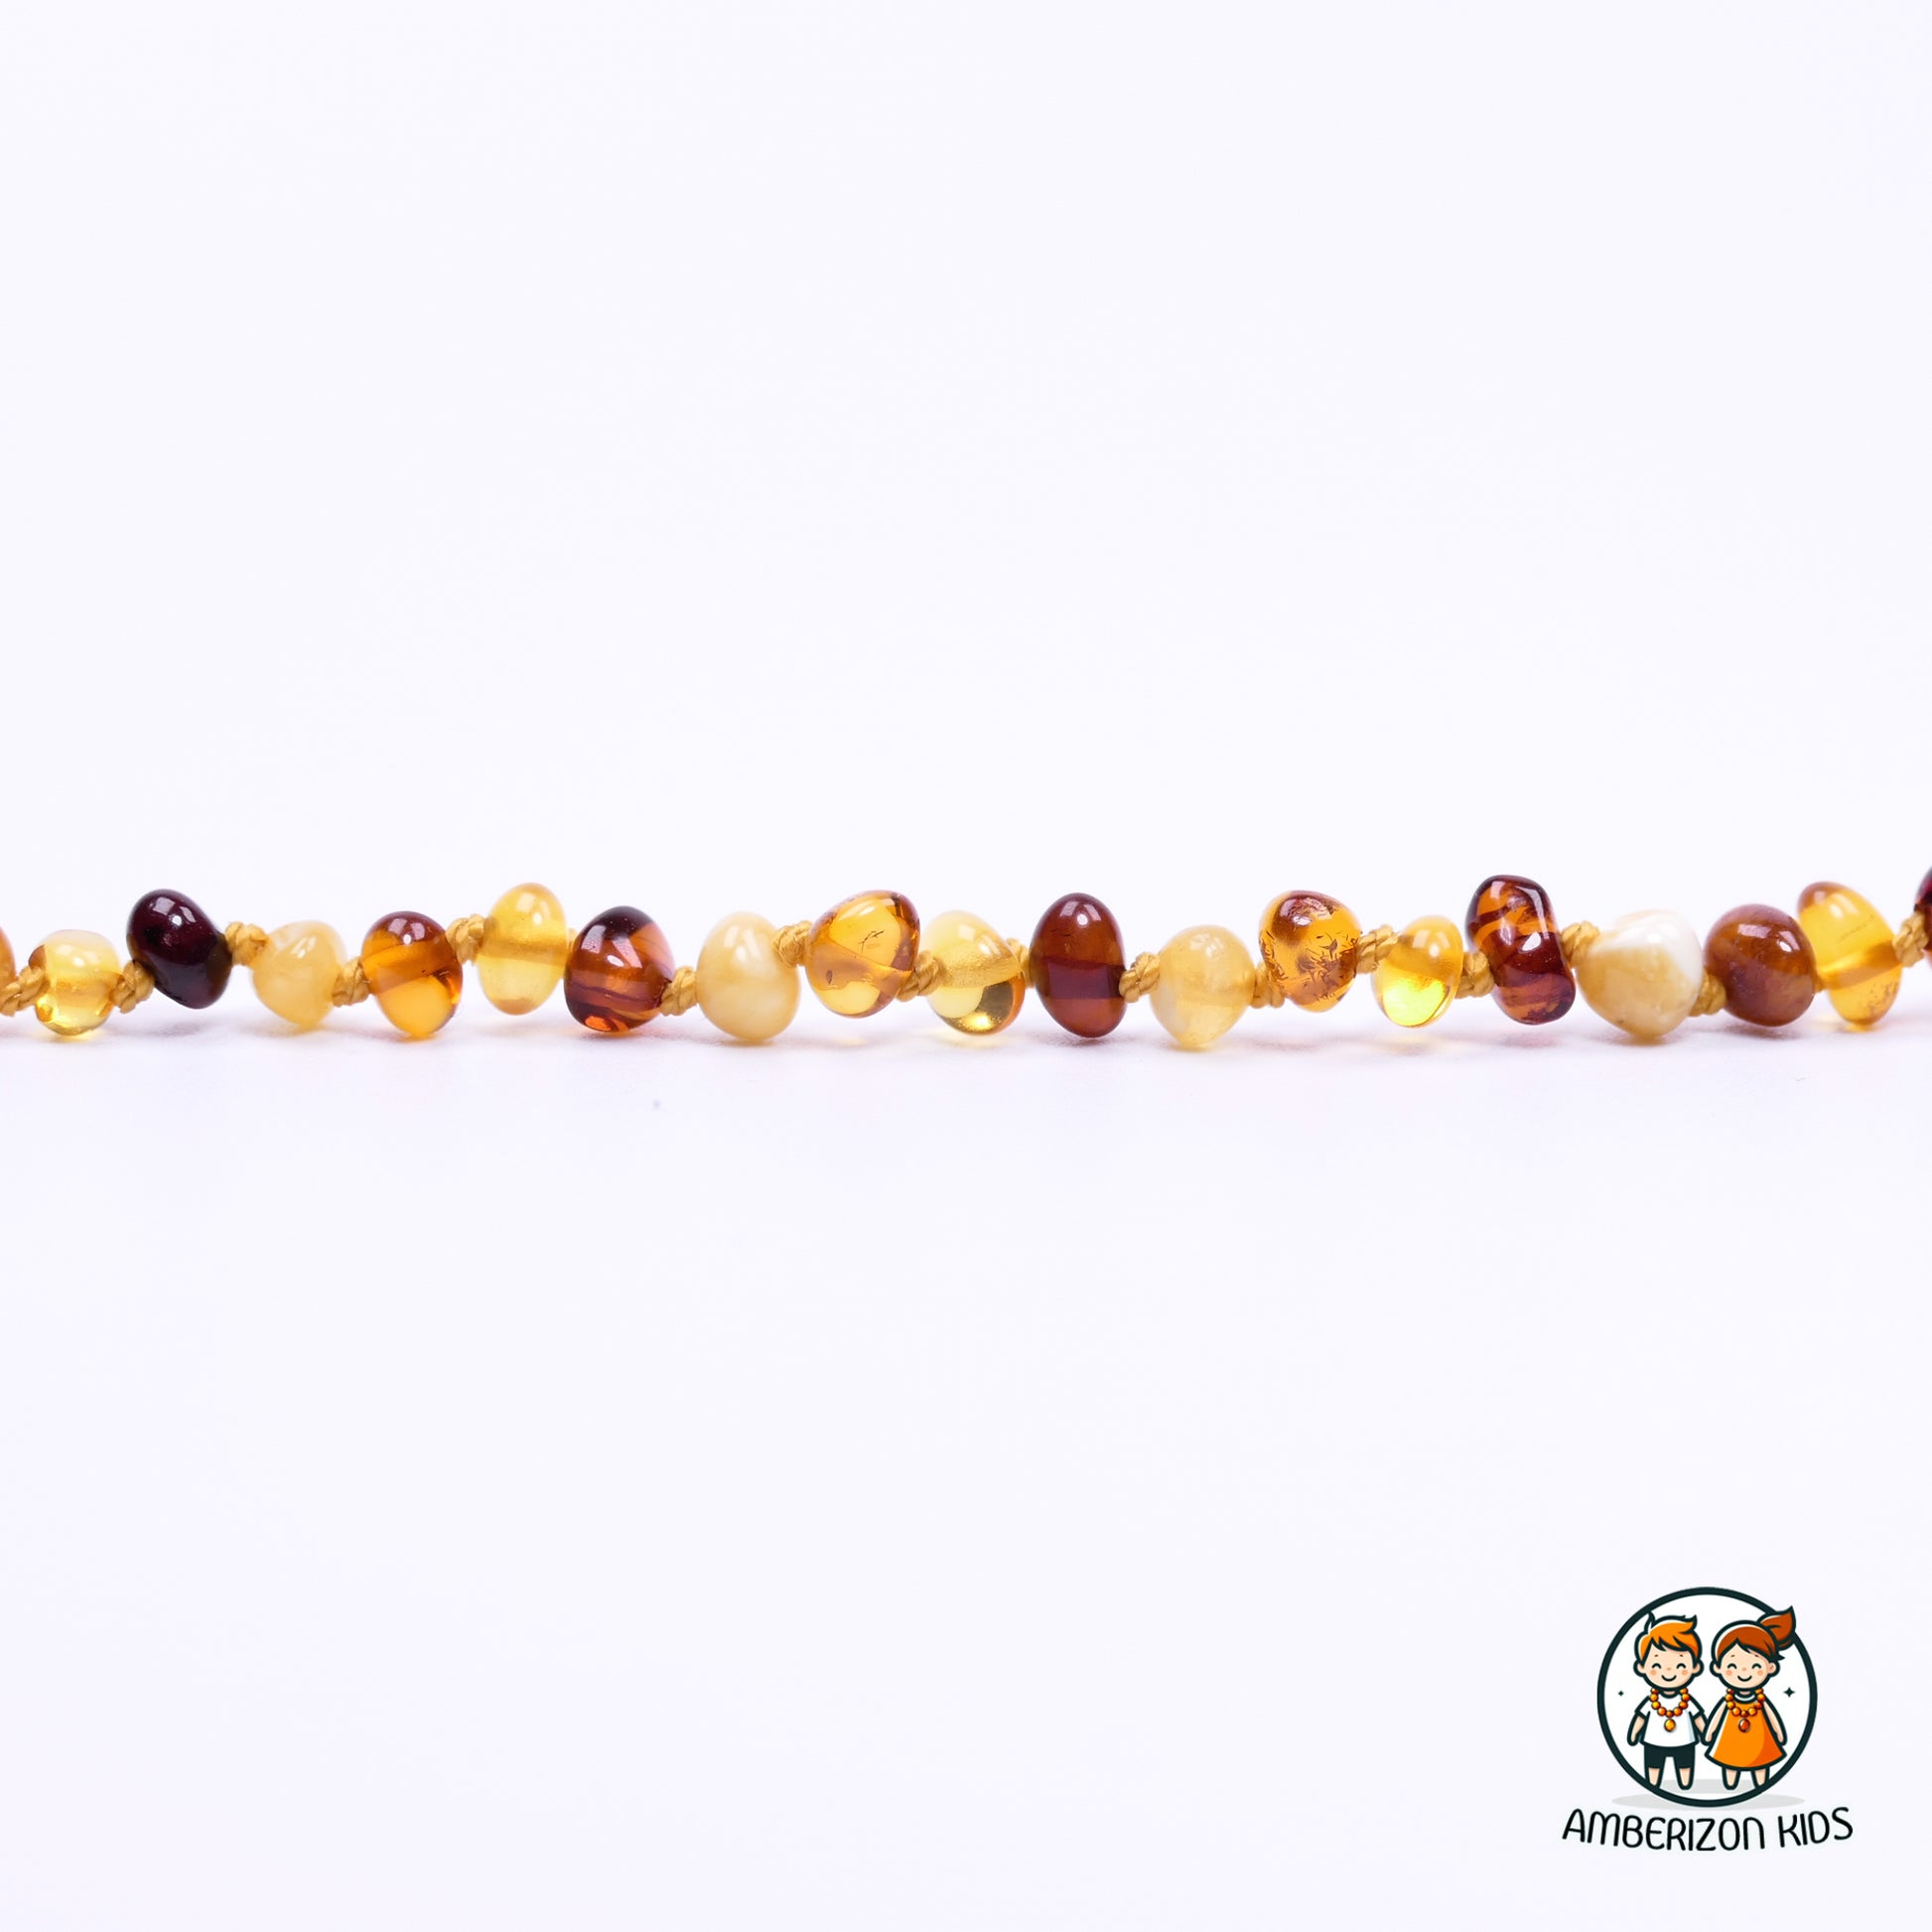 Real Baltic amber beads for teething from Europe, Lithuania, Latvia, Poland